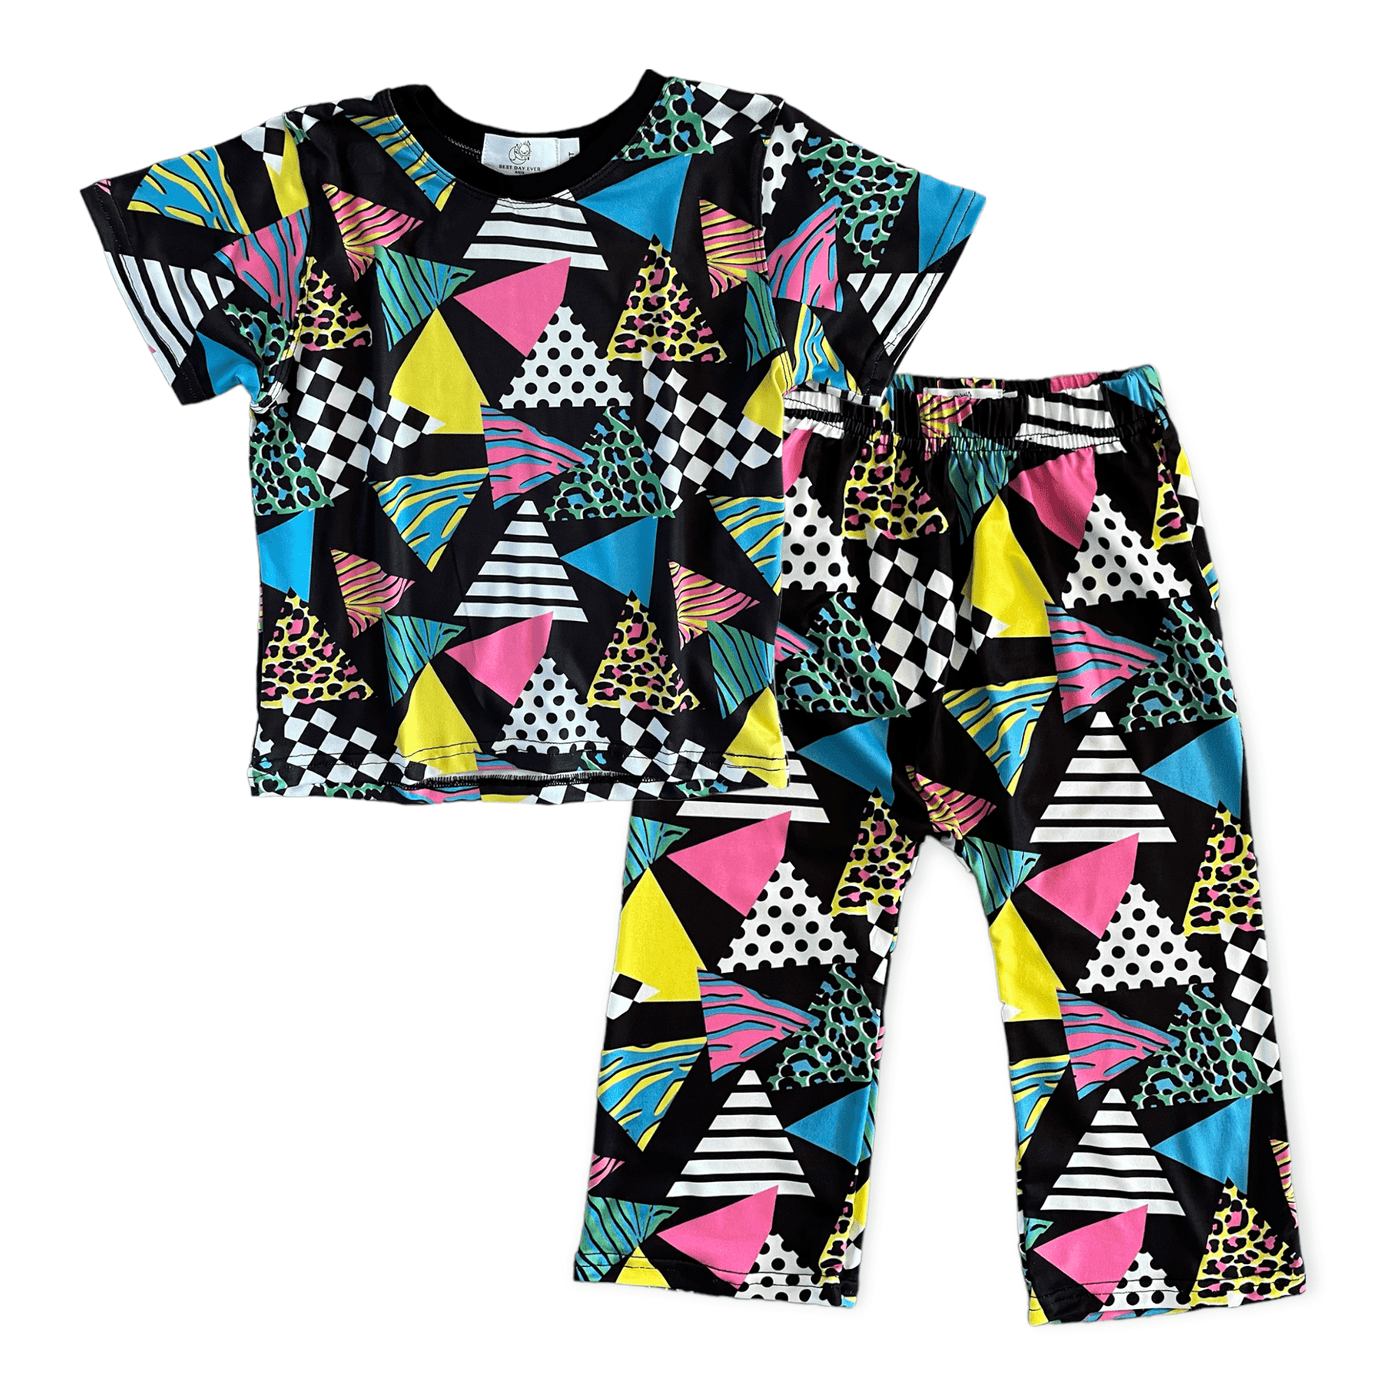 Best Day Ever Kids Sets Totally Rad Geometric Set buy online boutique kids clothing